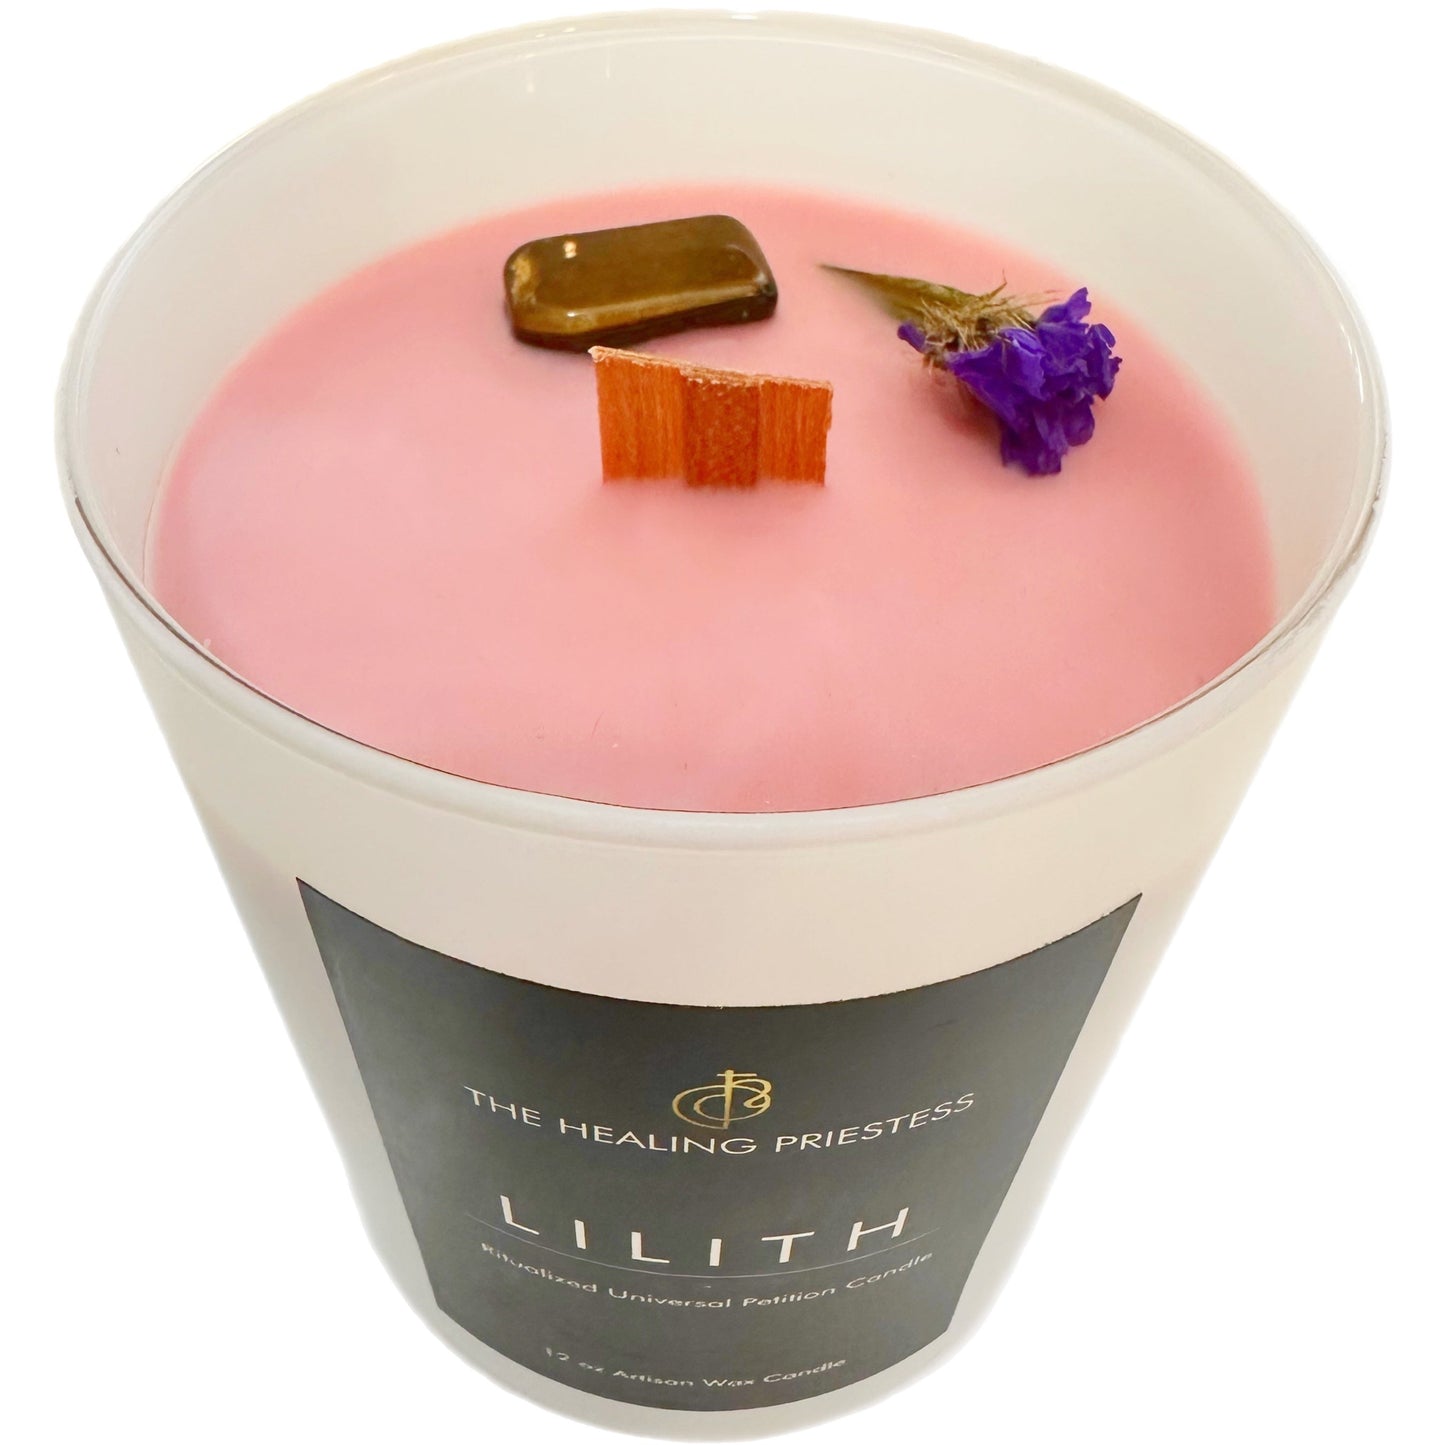 Lilith Universal Petition Candle